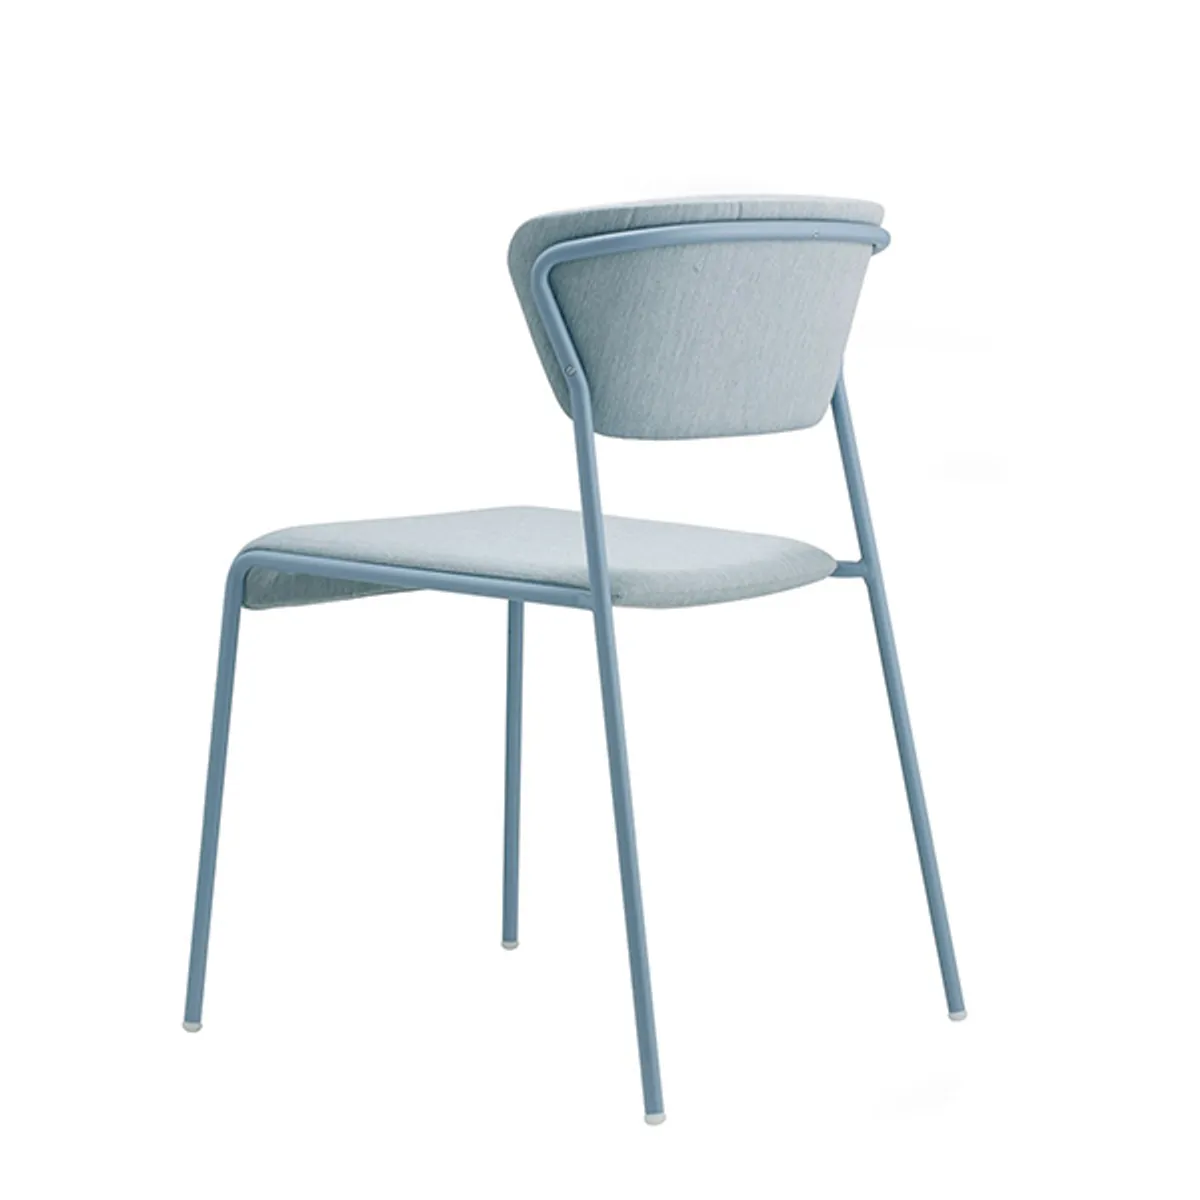 Robyn Soft Outdoor Chair Blue 05